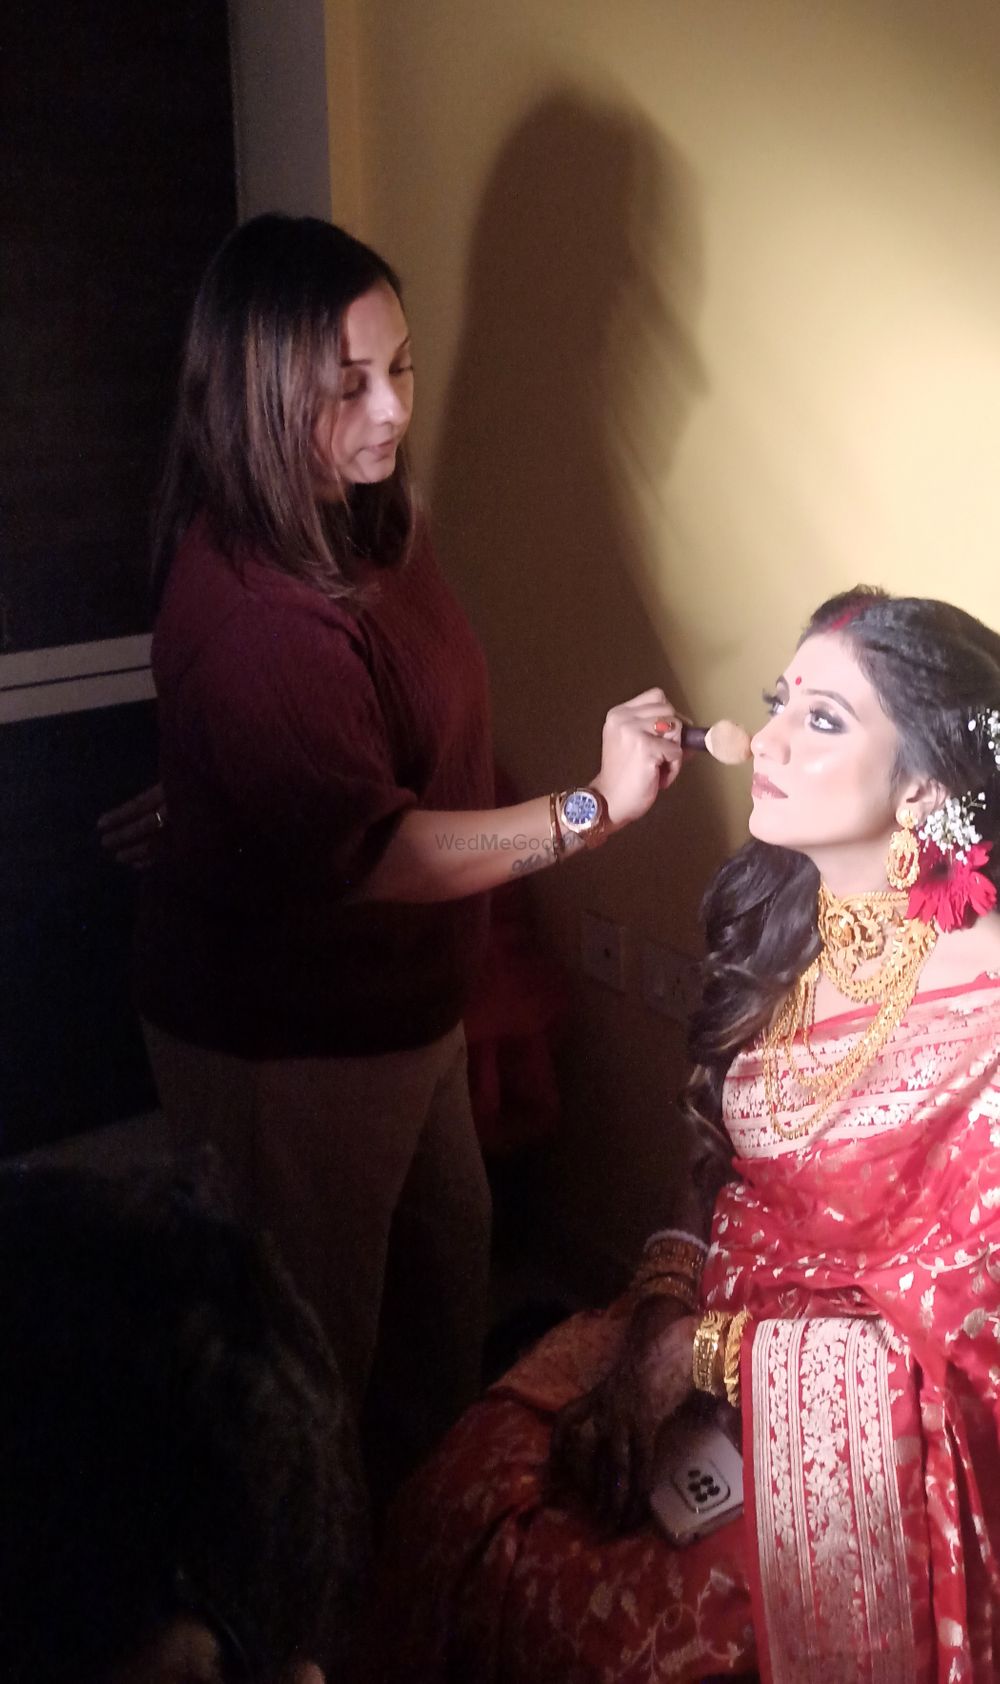 Photo From Reception Bridal Makeover - By Rupa's Makeup Mirror